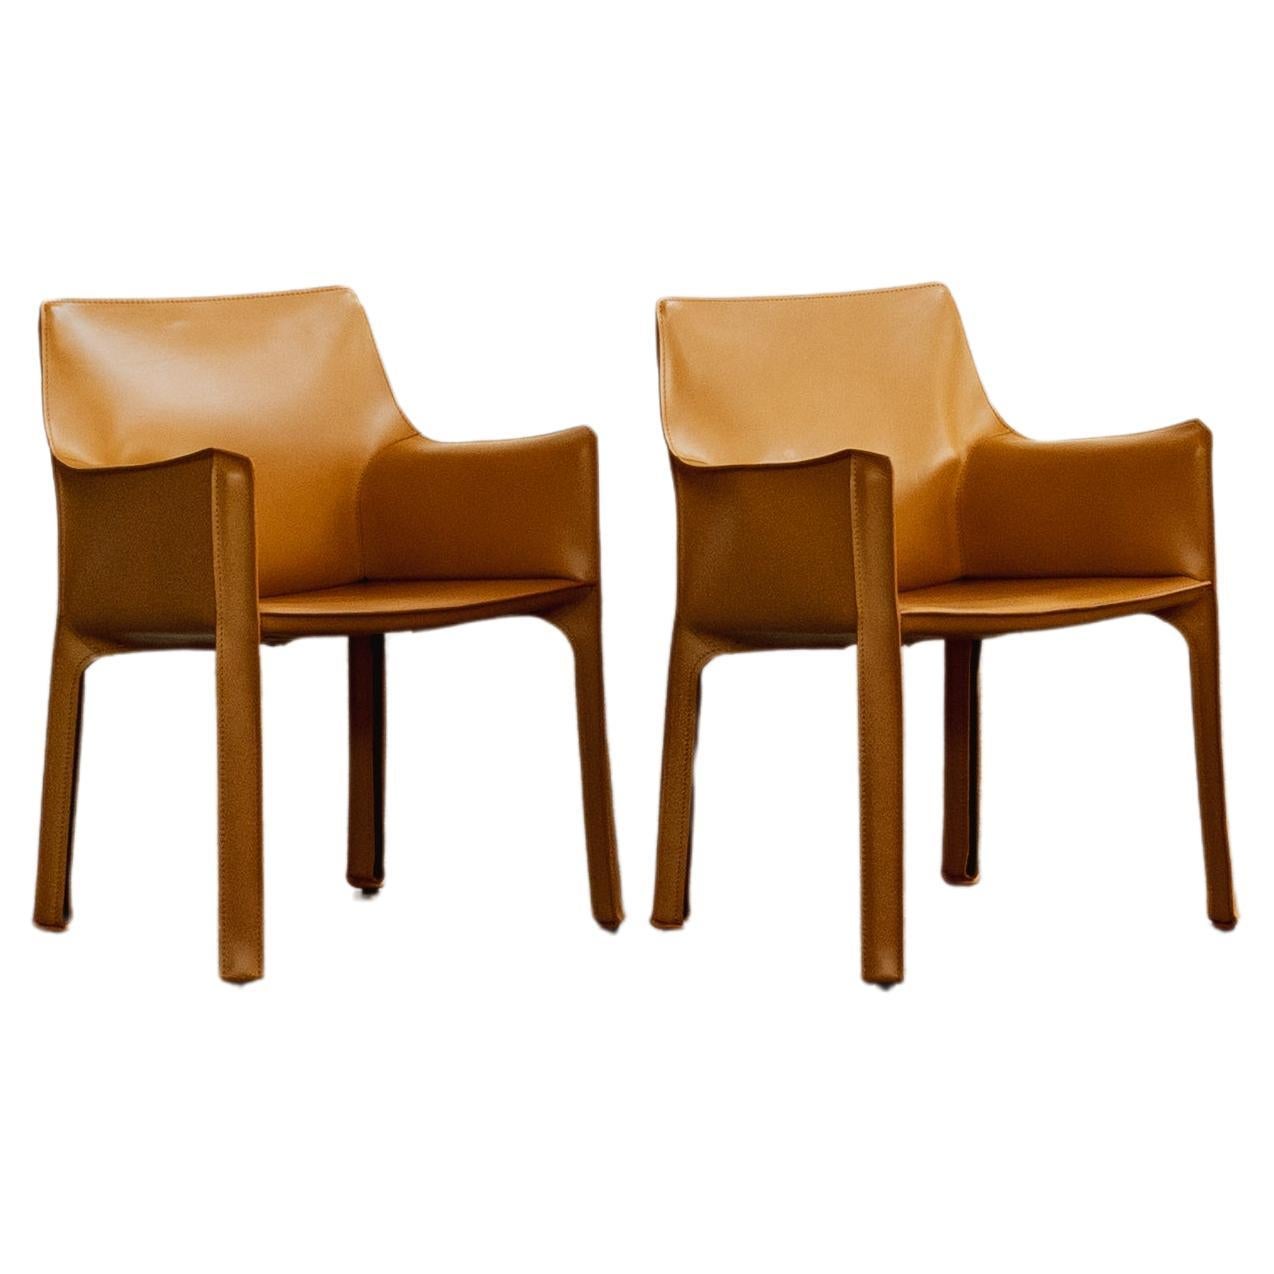 Mario Bellini "CAB 413" Chairs for Cassina in Yellow, 1977, Set of 2